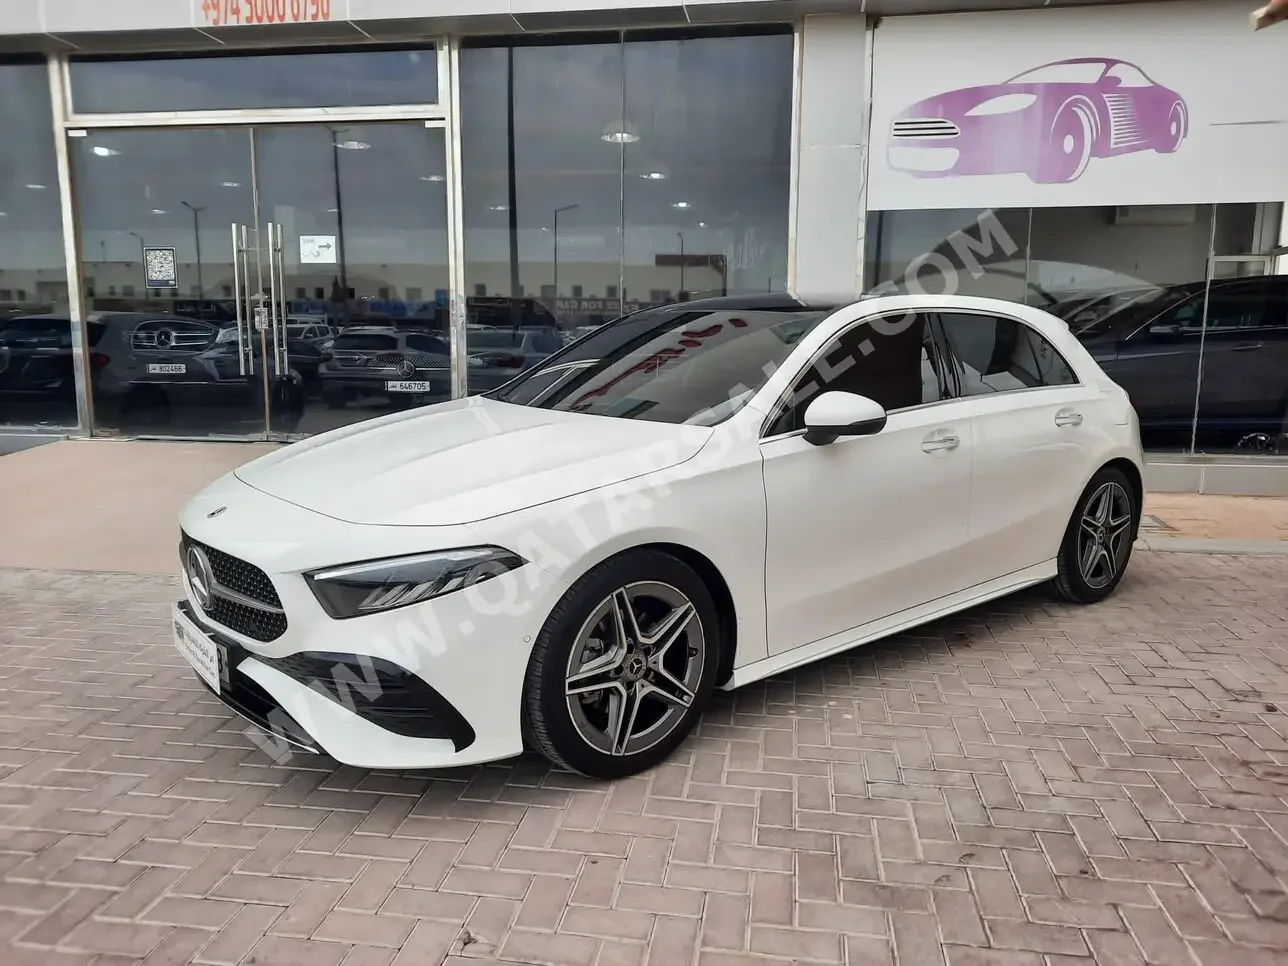 Mercedes-Benz  A-Class  200  2023  Automatic  14,000 Km  4 Cylinder  Front Wheel Drive (FWD)  Coupe / Sport  White  With Warranty